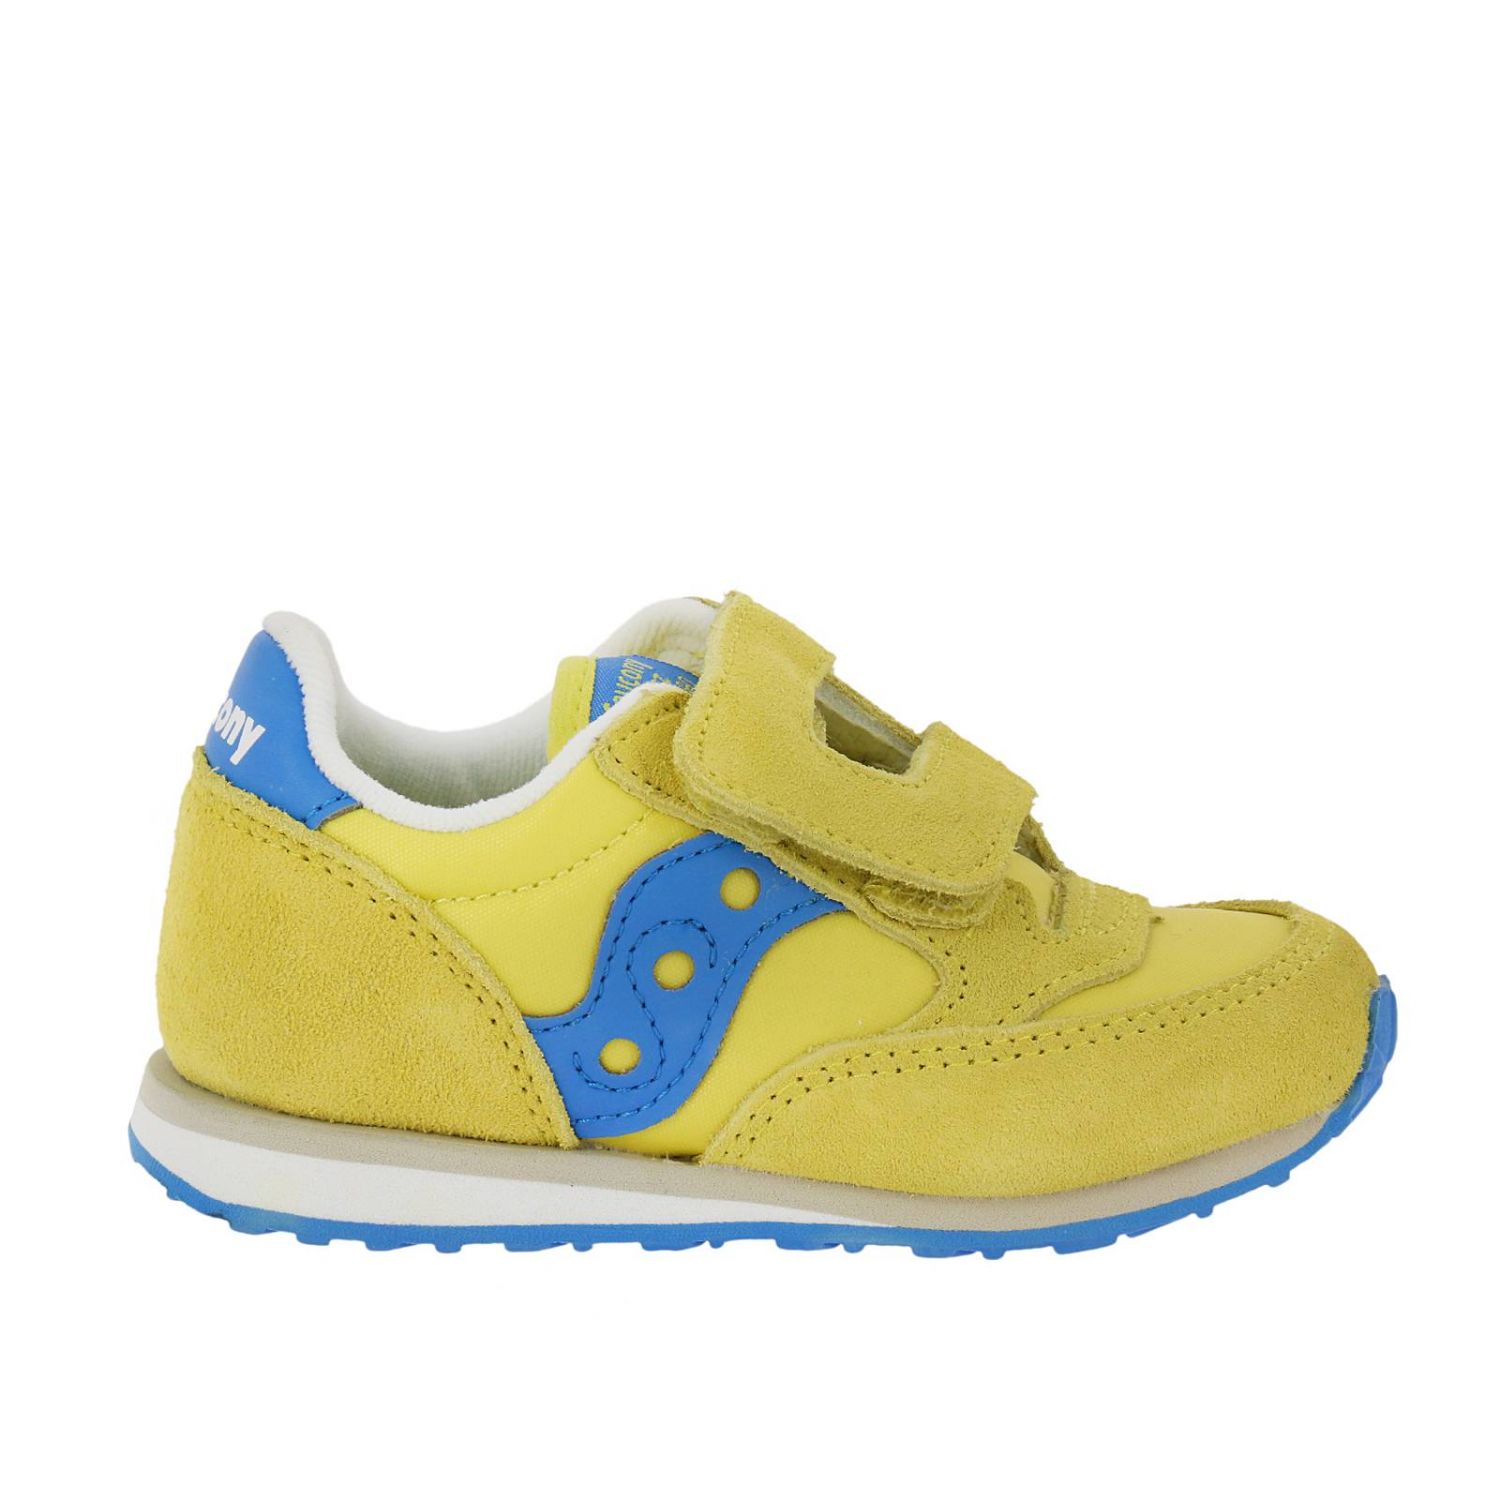 saucony shoes kids yellow